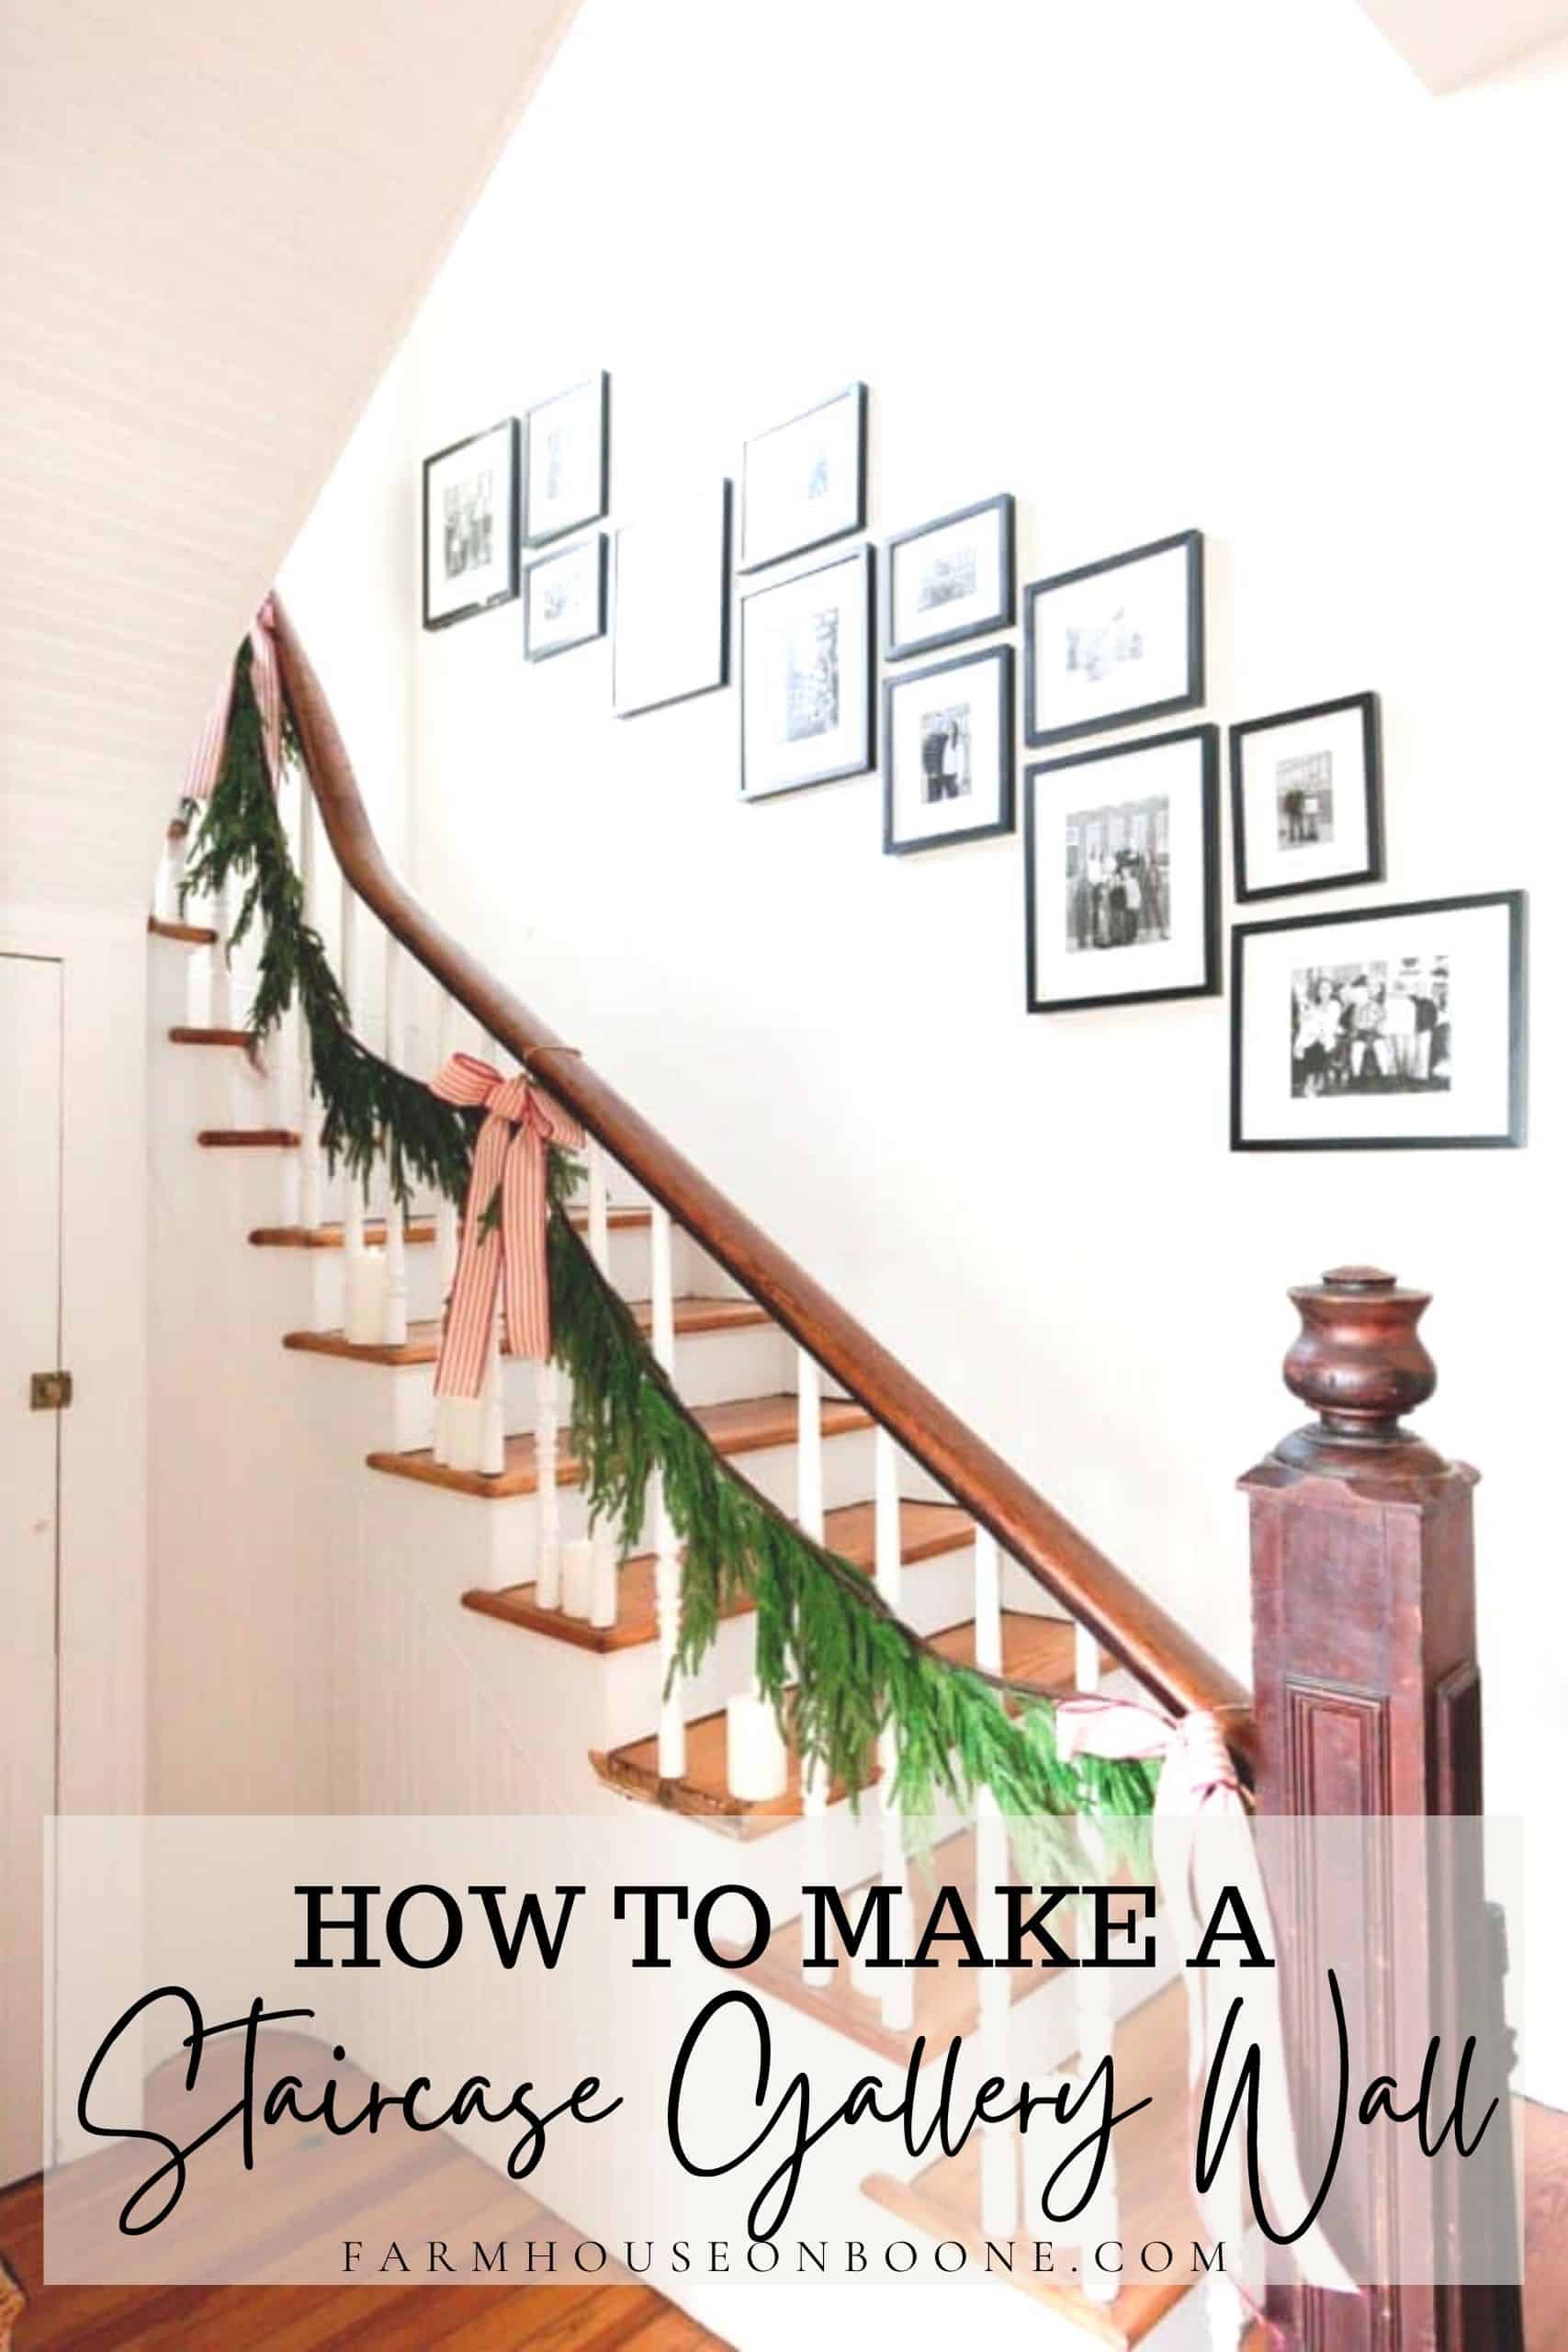 How To Hang IKEA Ribba Picture Frames: 6 Easy Ways With Steps & Video -  Abbotts At Home